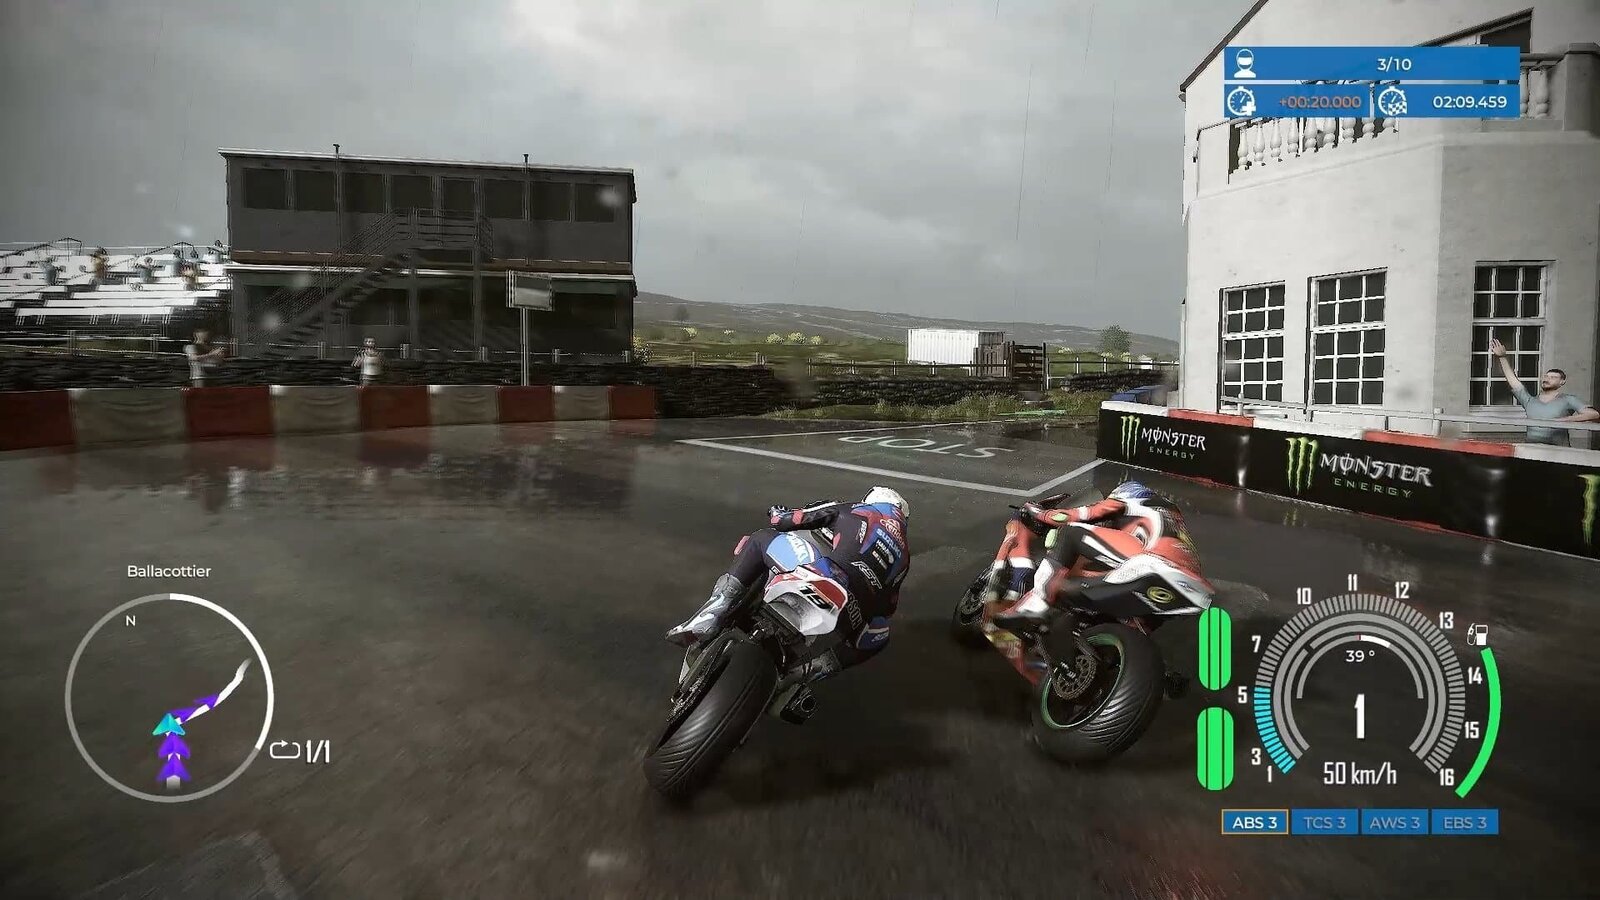 TT Isle Of Man: Ride on the Edge 3 - Races Roster